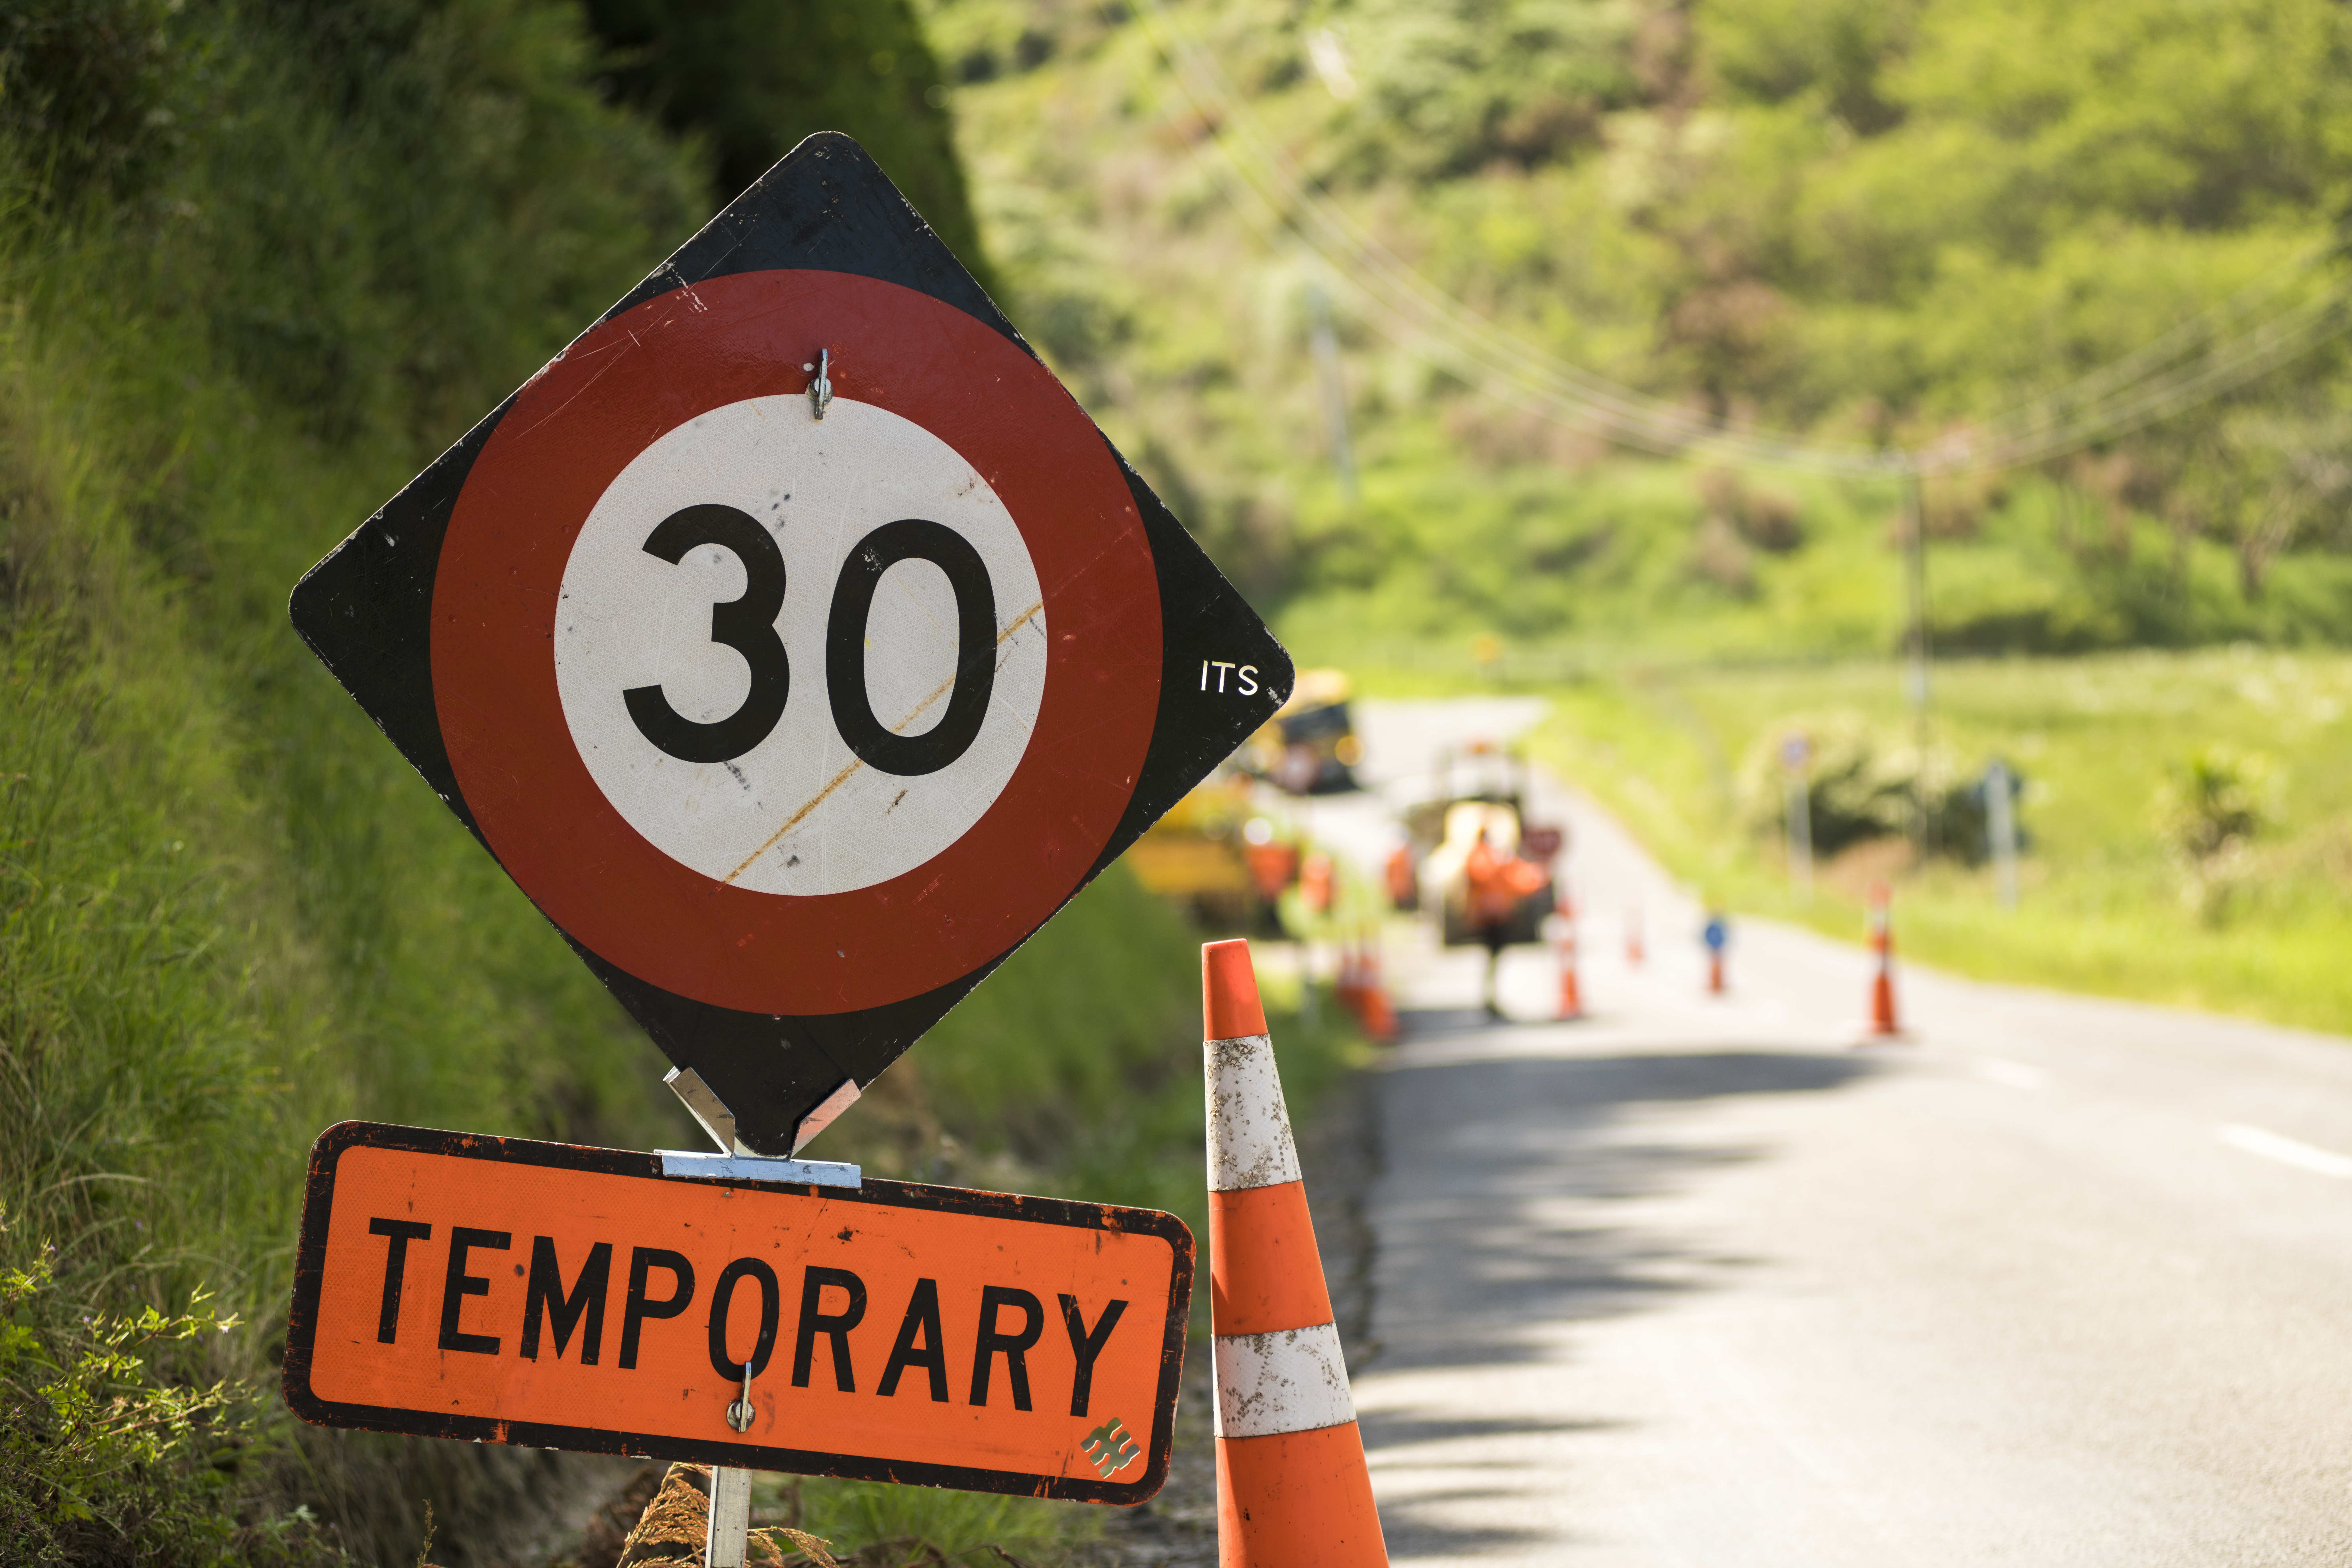 Essential services such as undertaking emergency roading work will continue during the COVID-19 response.